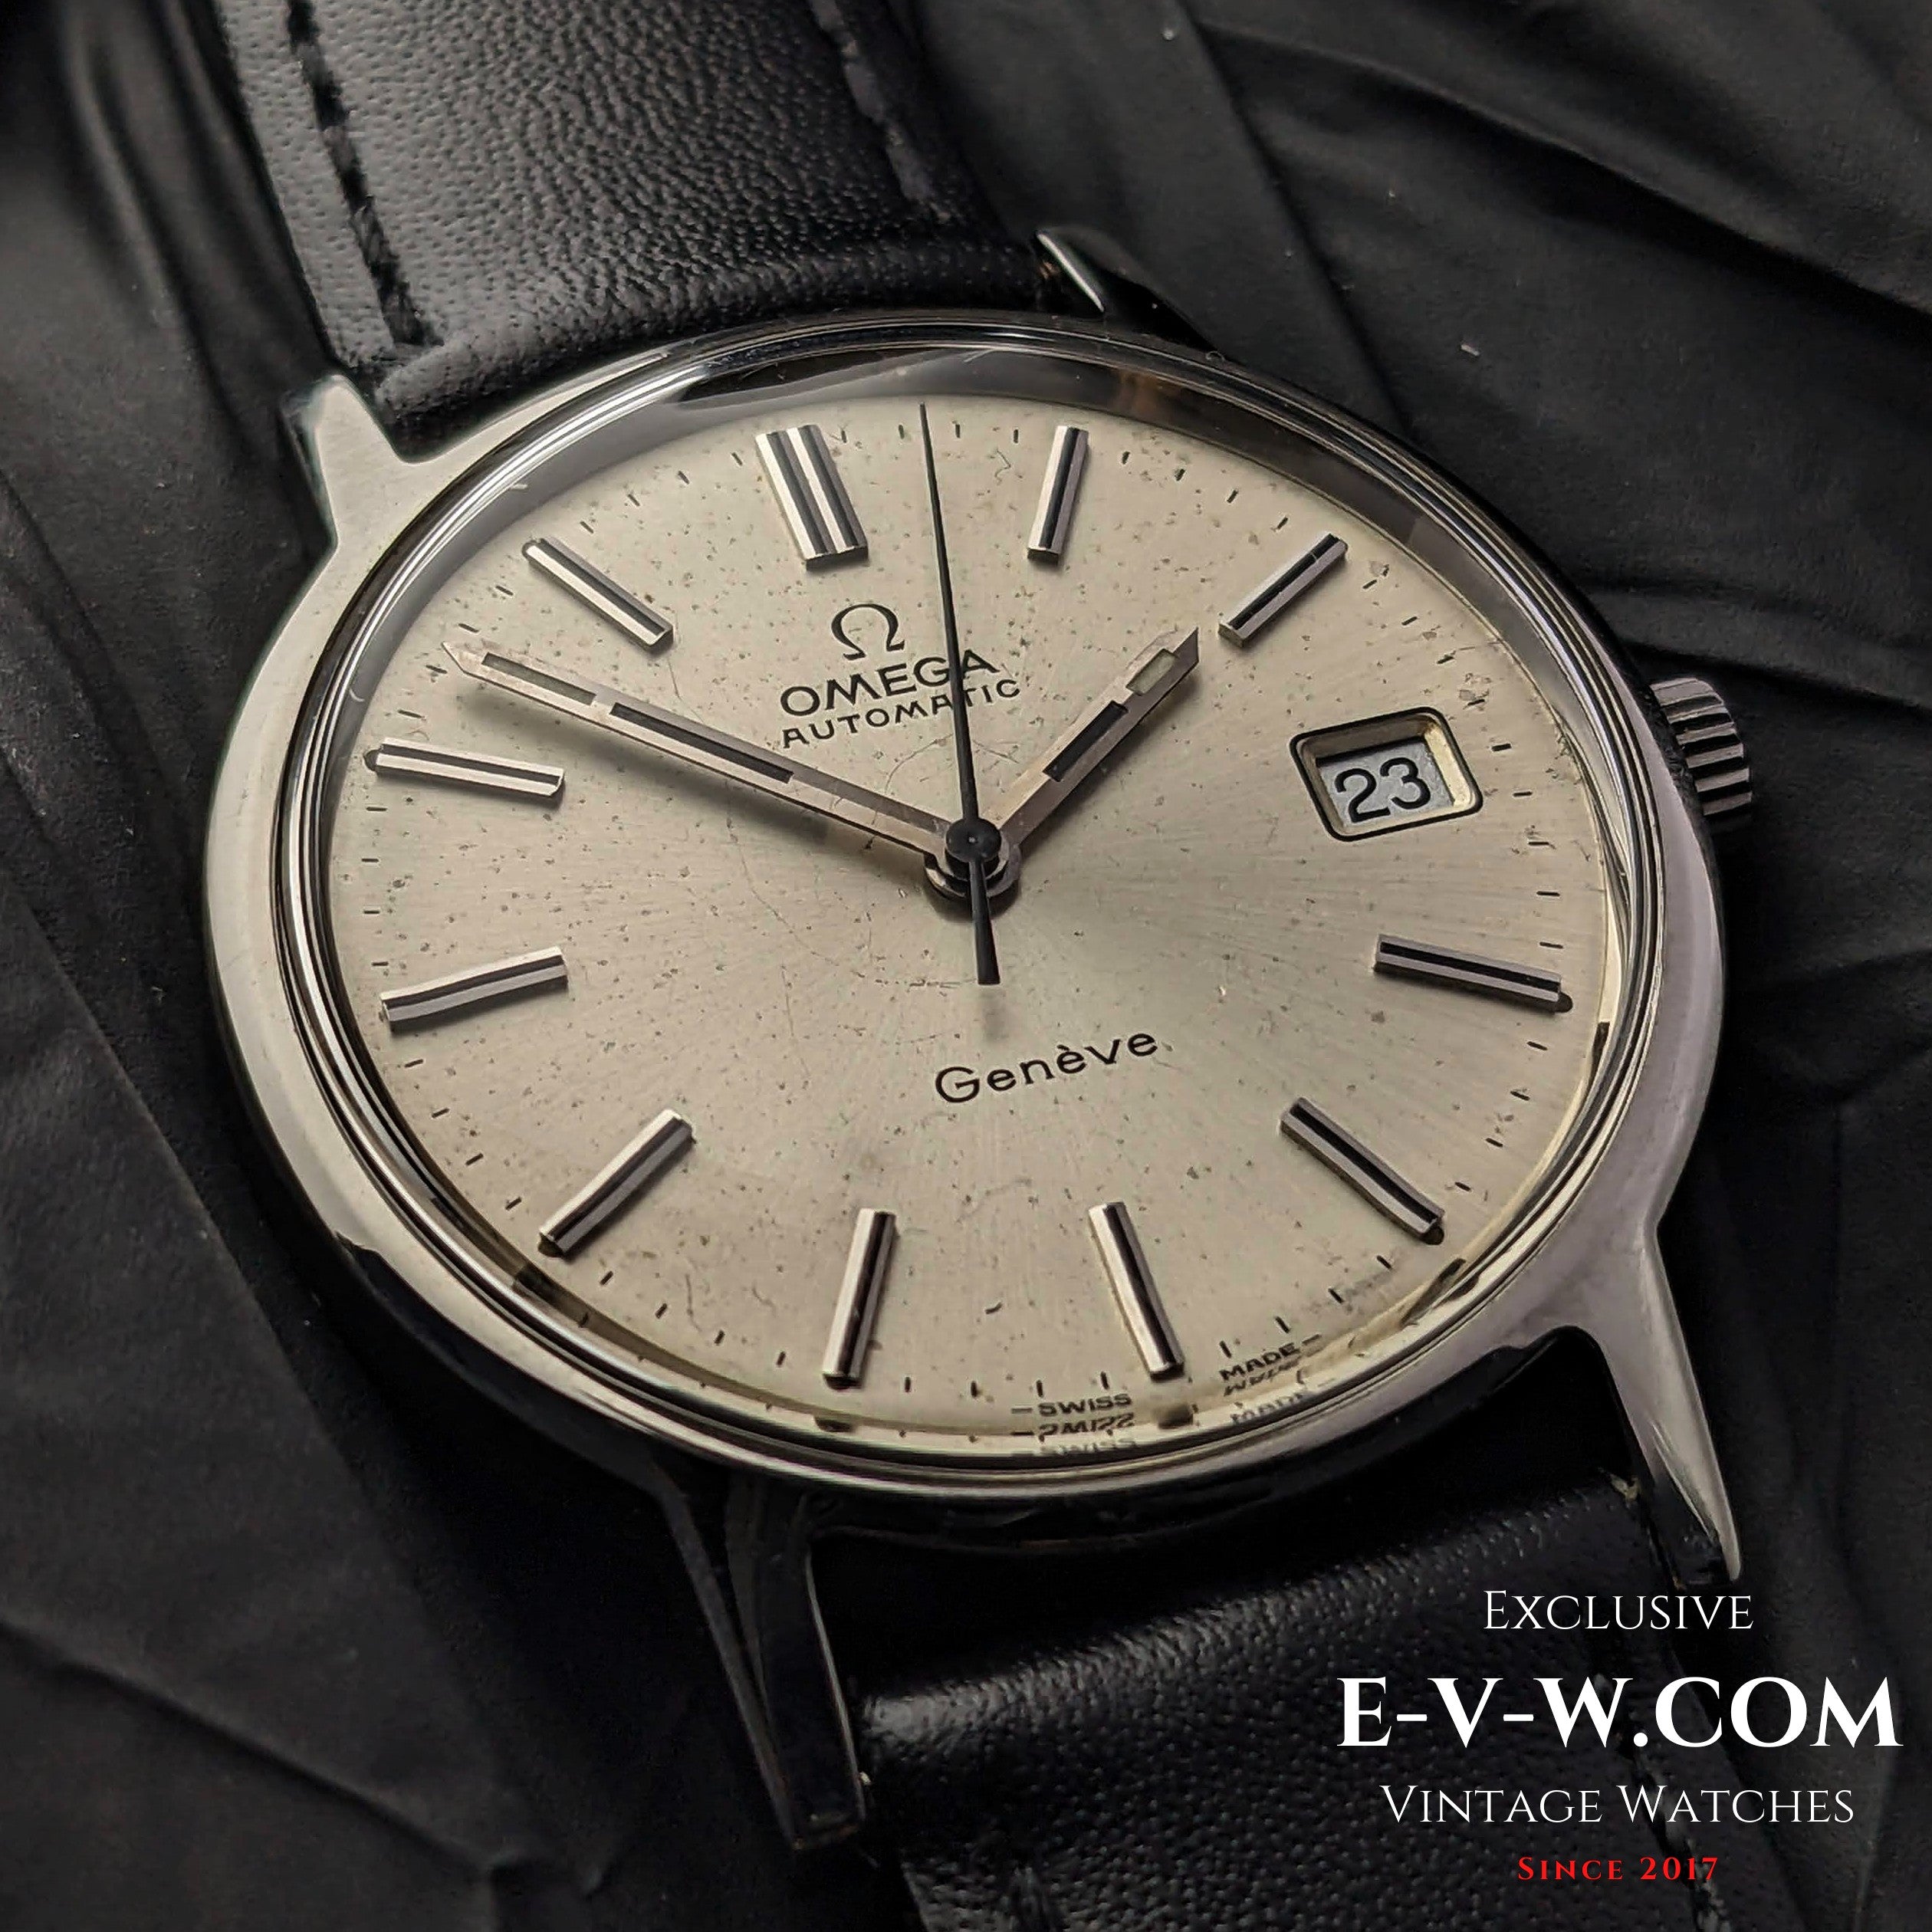 E-V-W – Exclusive Vintage Swiss Watches